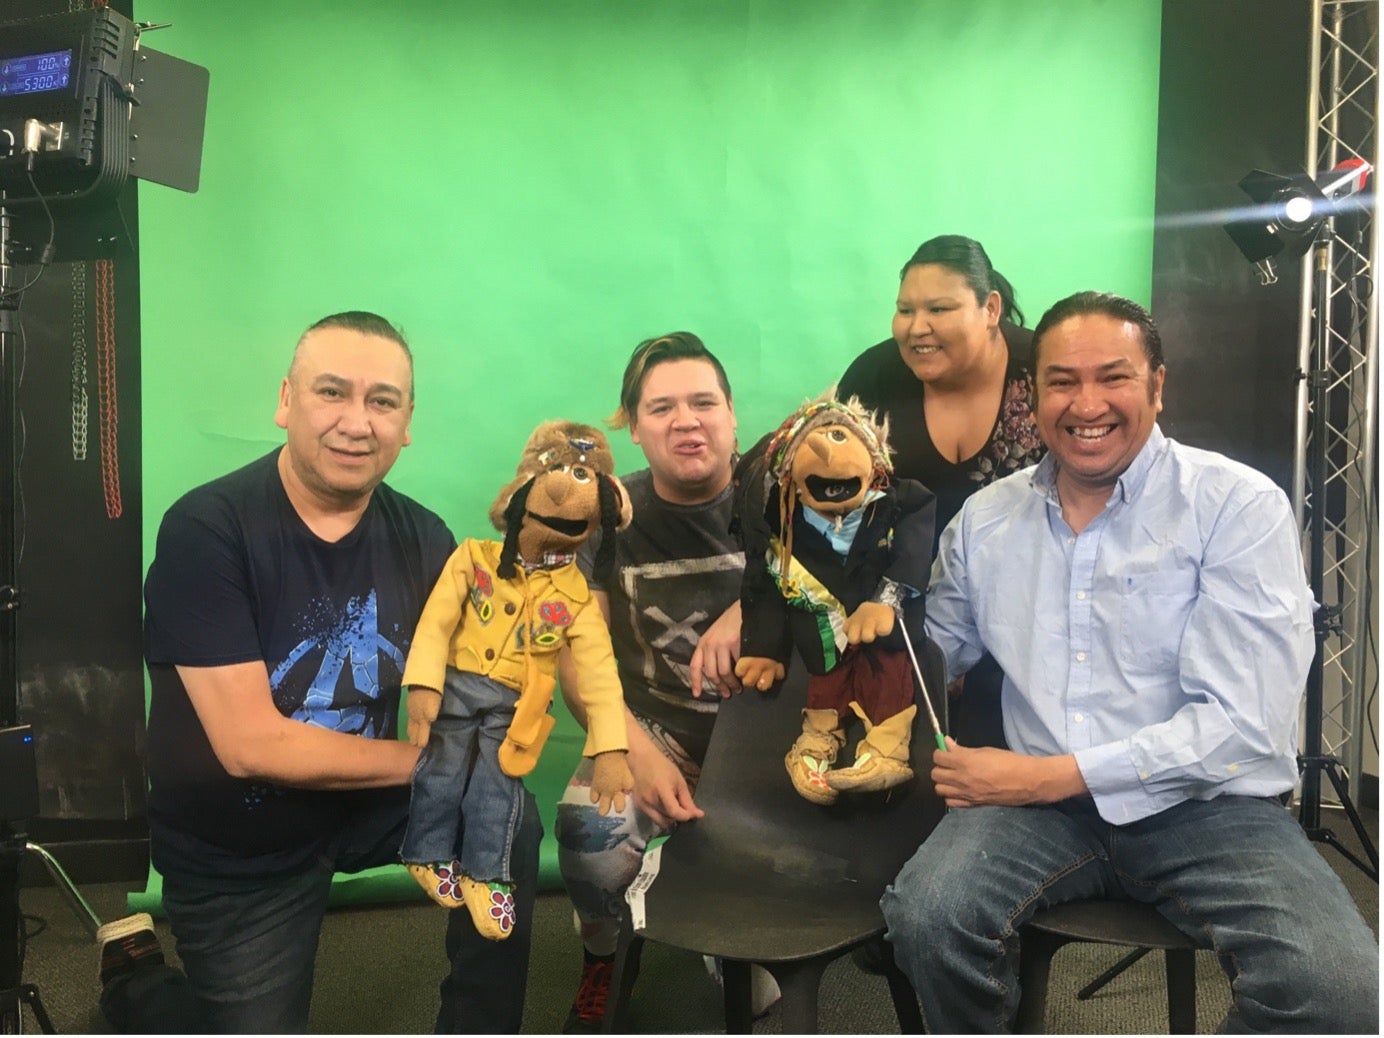 Performers of the songs in the key of Cree posing for a photo in front of a green screen